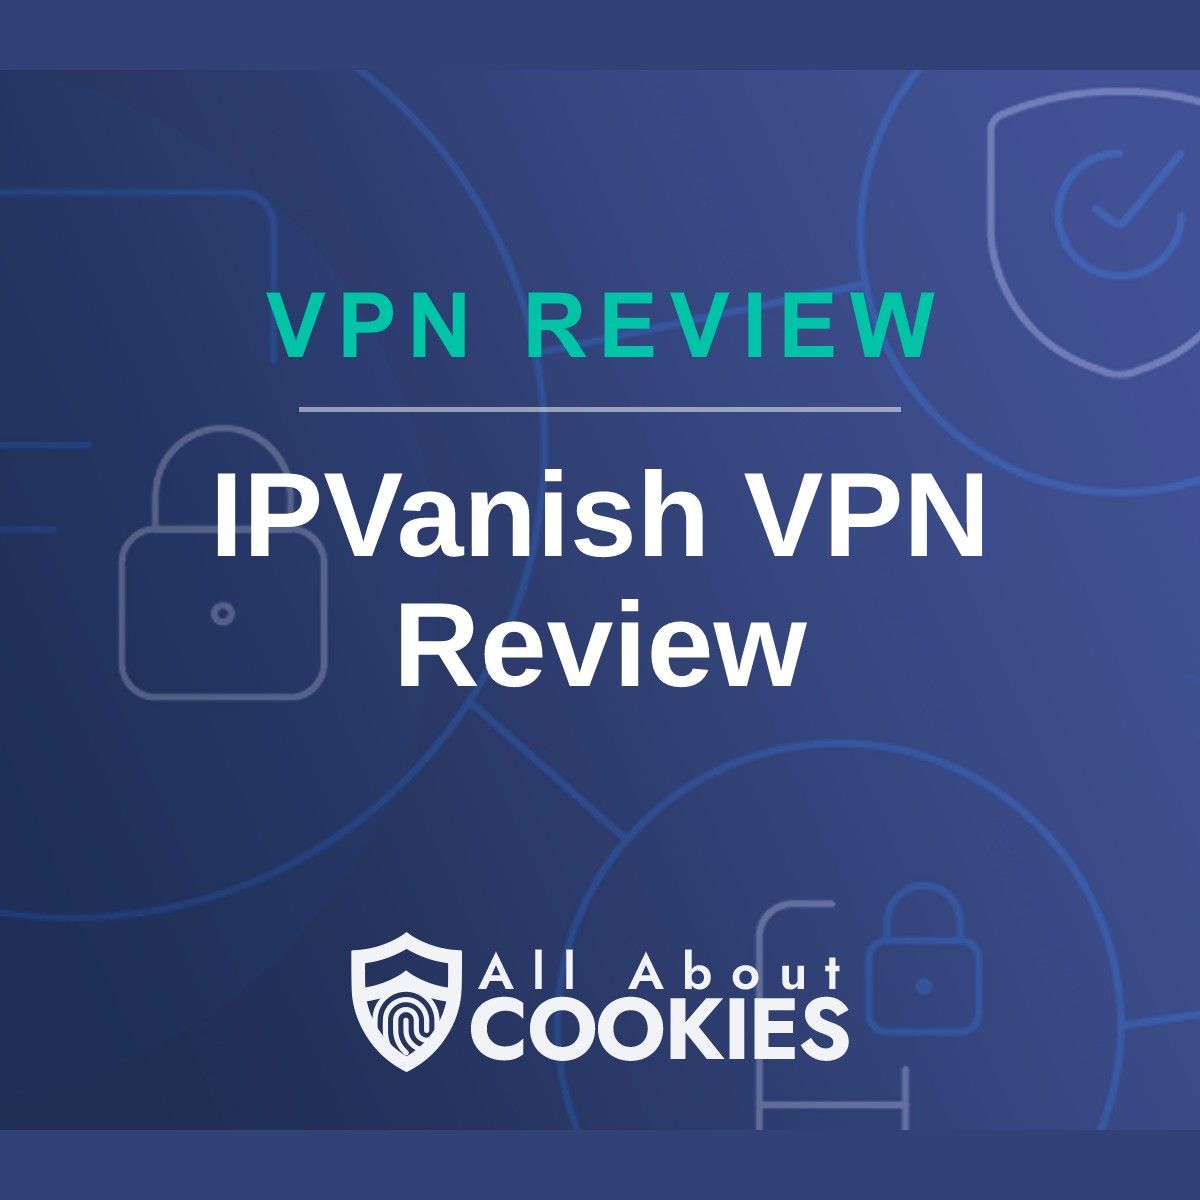 A blue background with images of locks and shields with the text &quot;IPVanish VPN Review&quot; and the All About Cookies logo. 